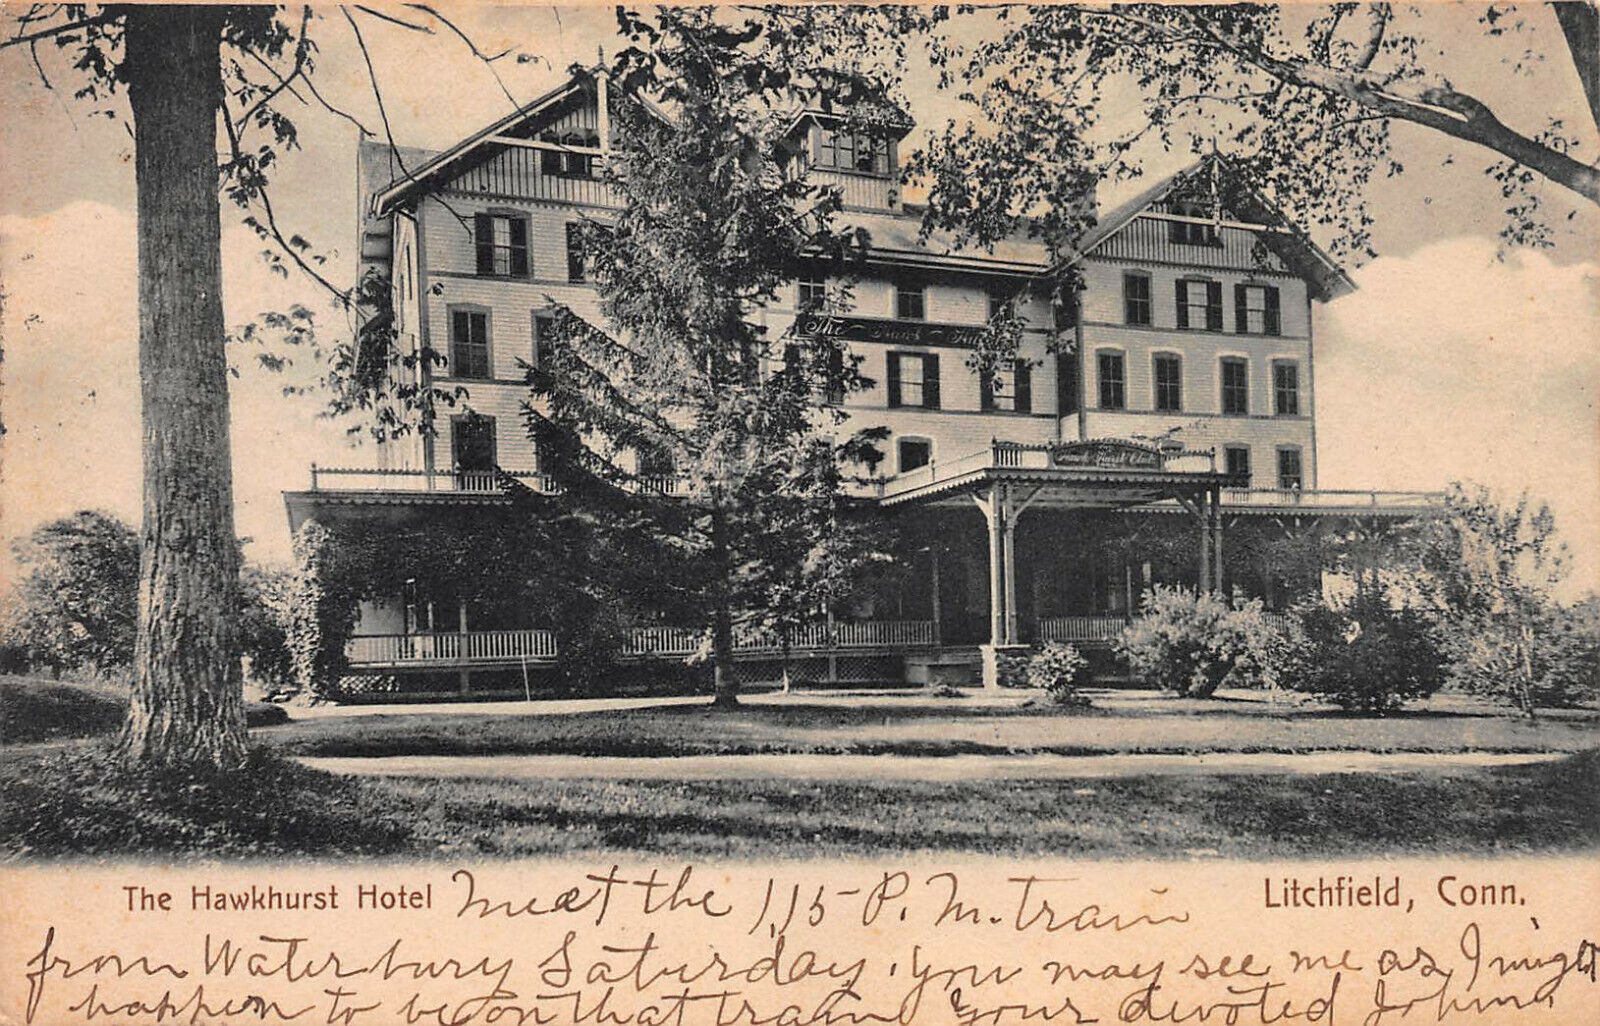 The Hawkhurst Hotel, Litchfield, Connecticut, Early Postcard, Used in 1906